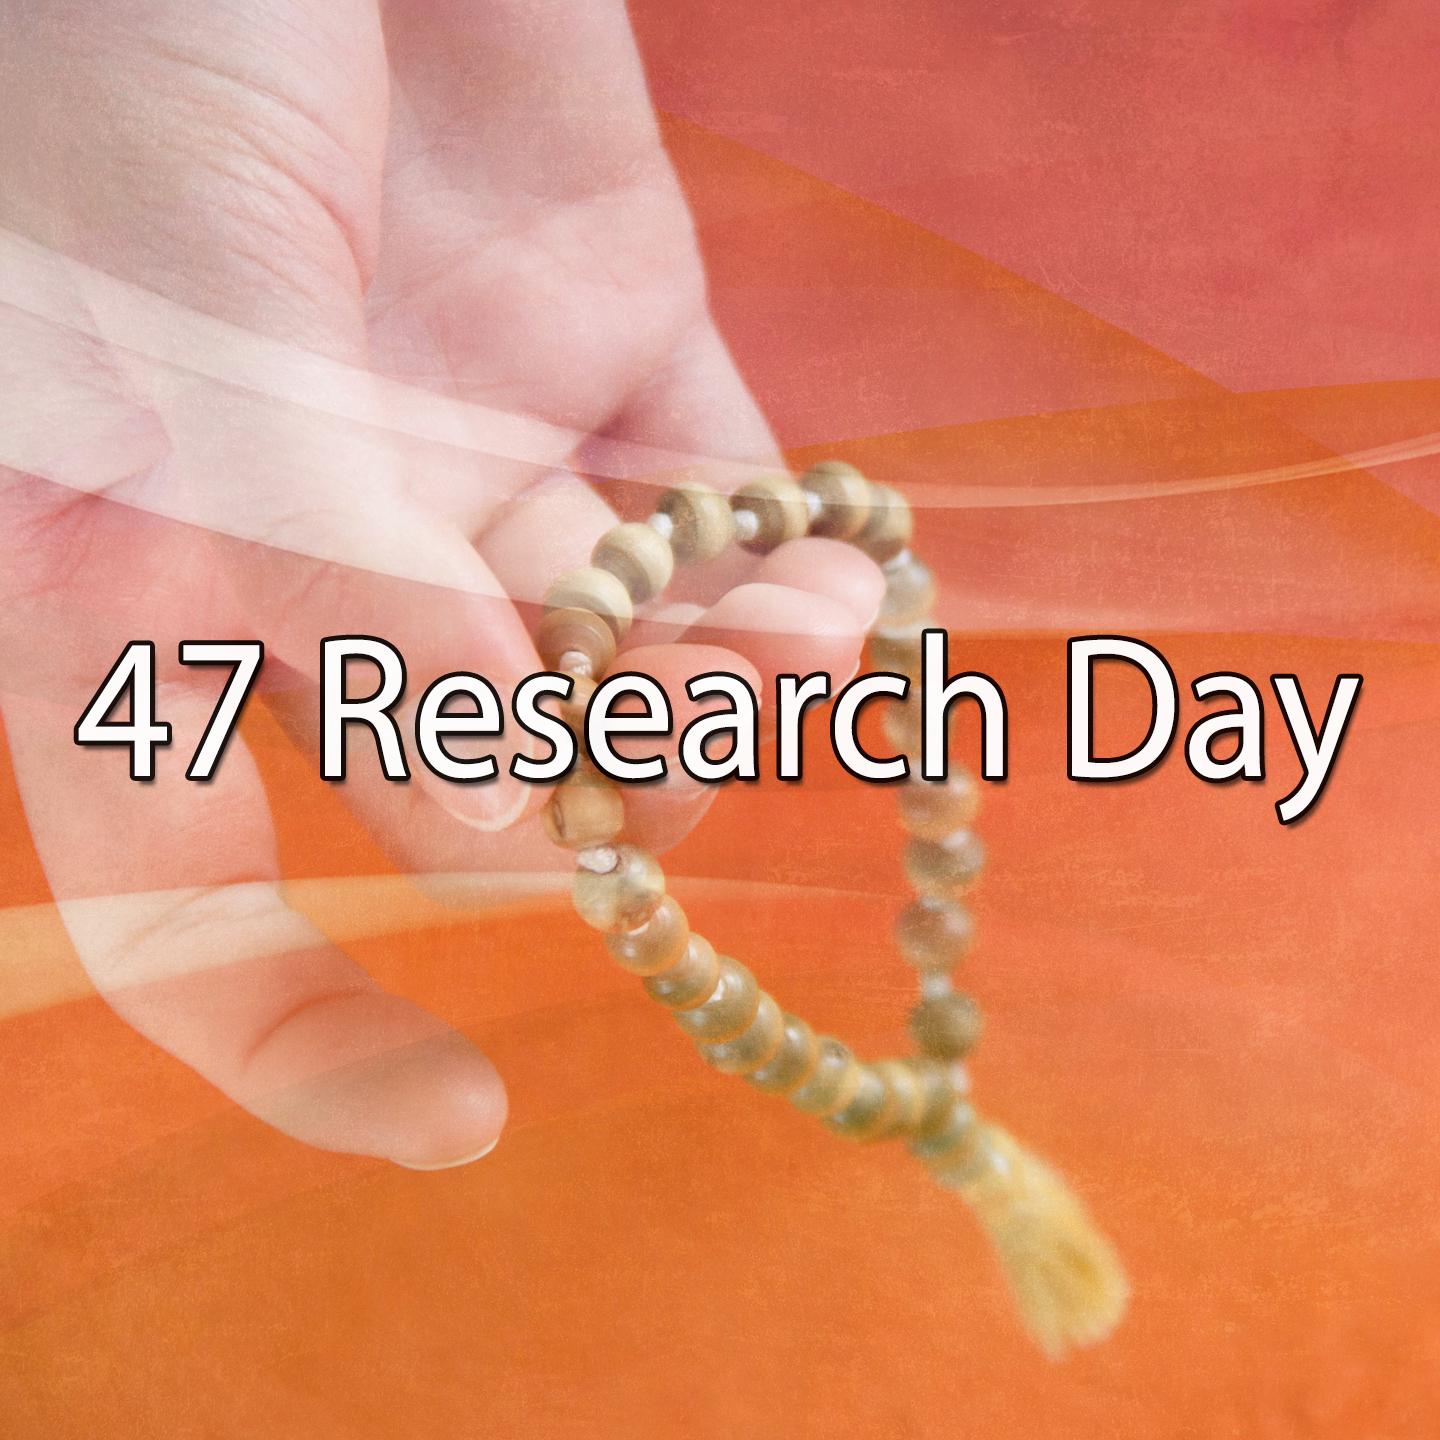 47 Research Day